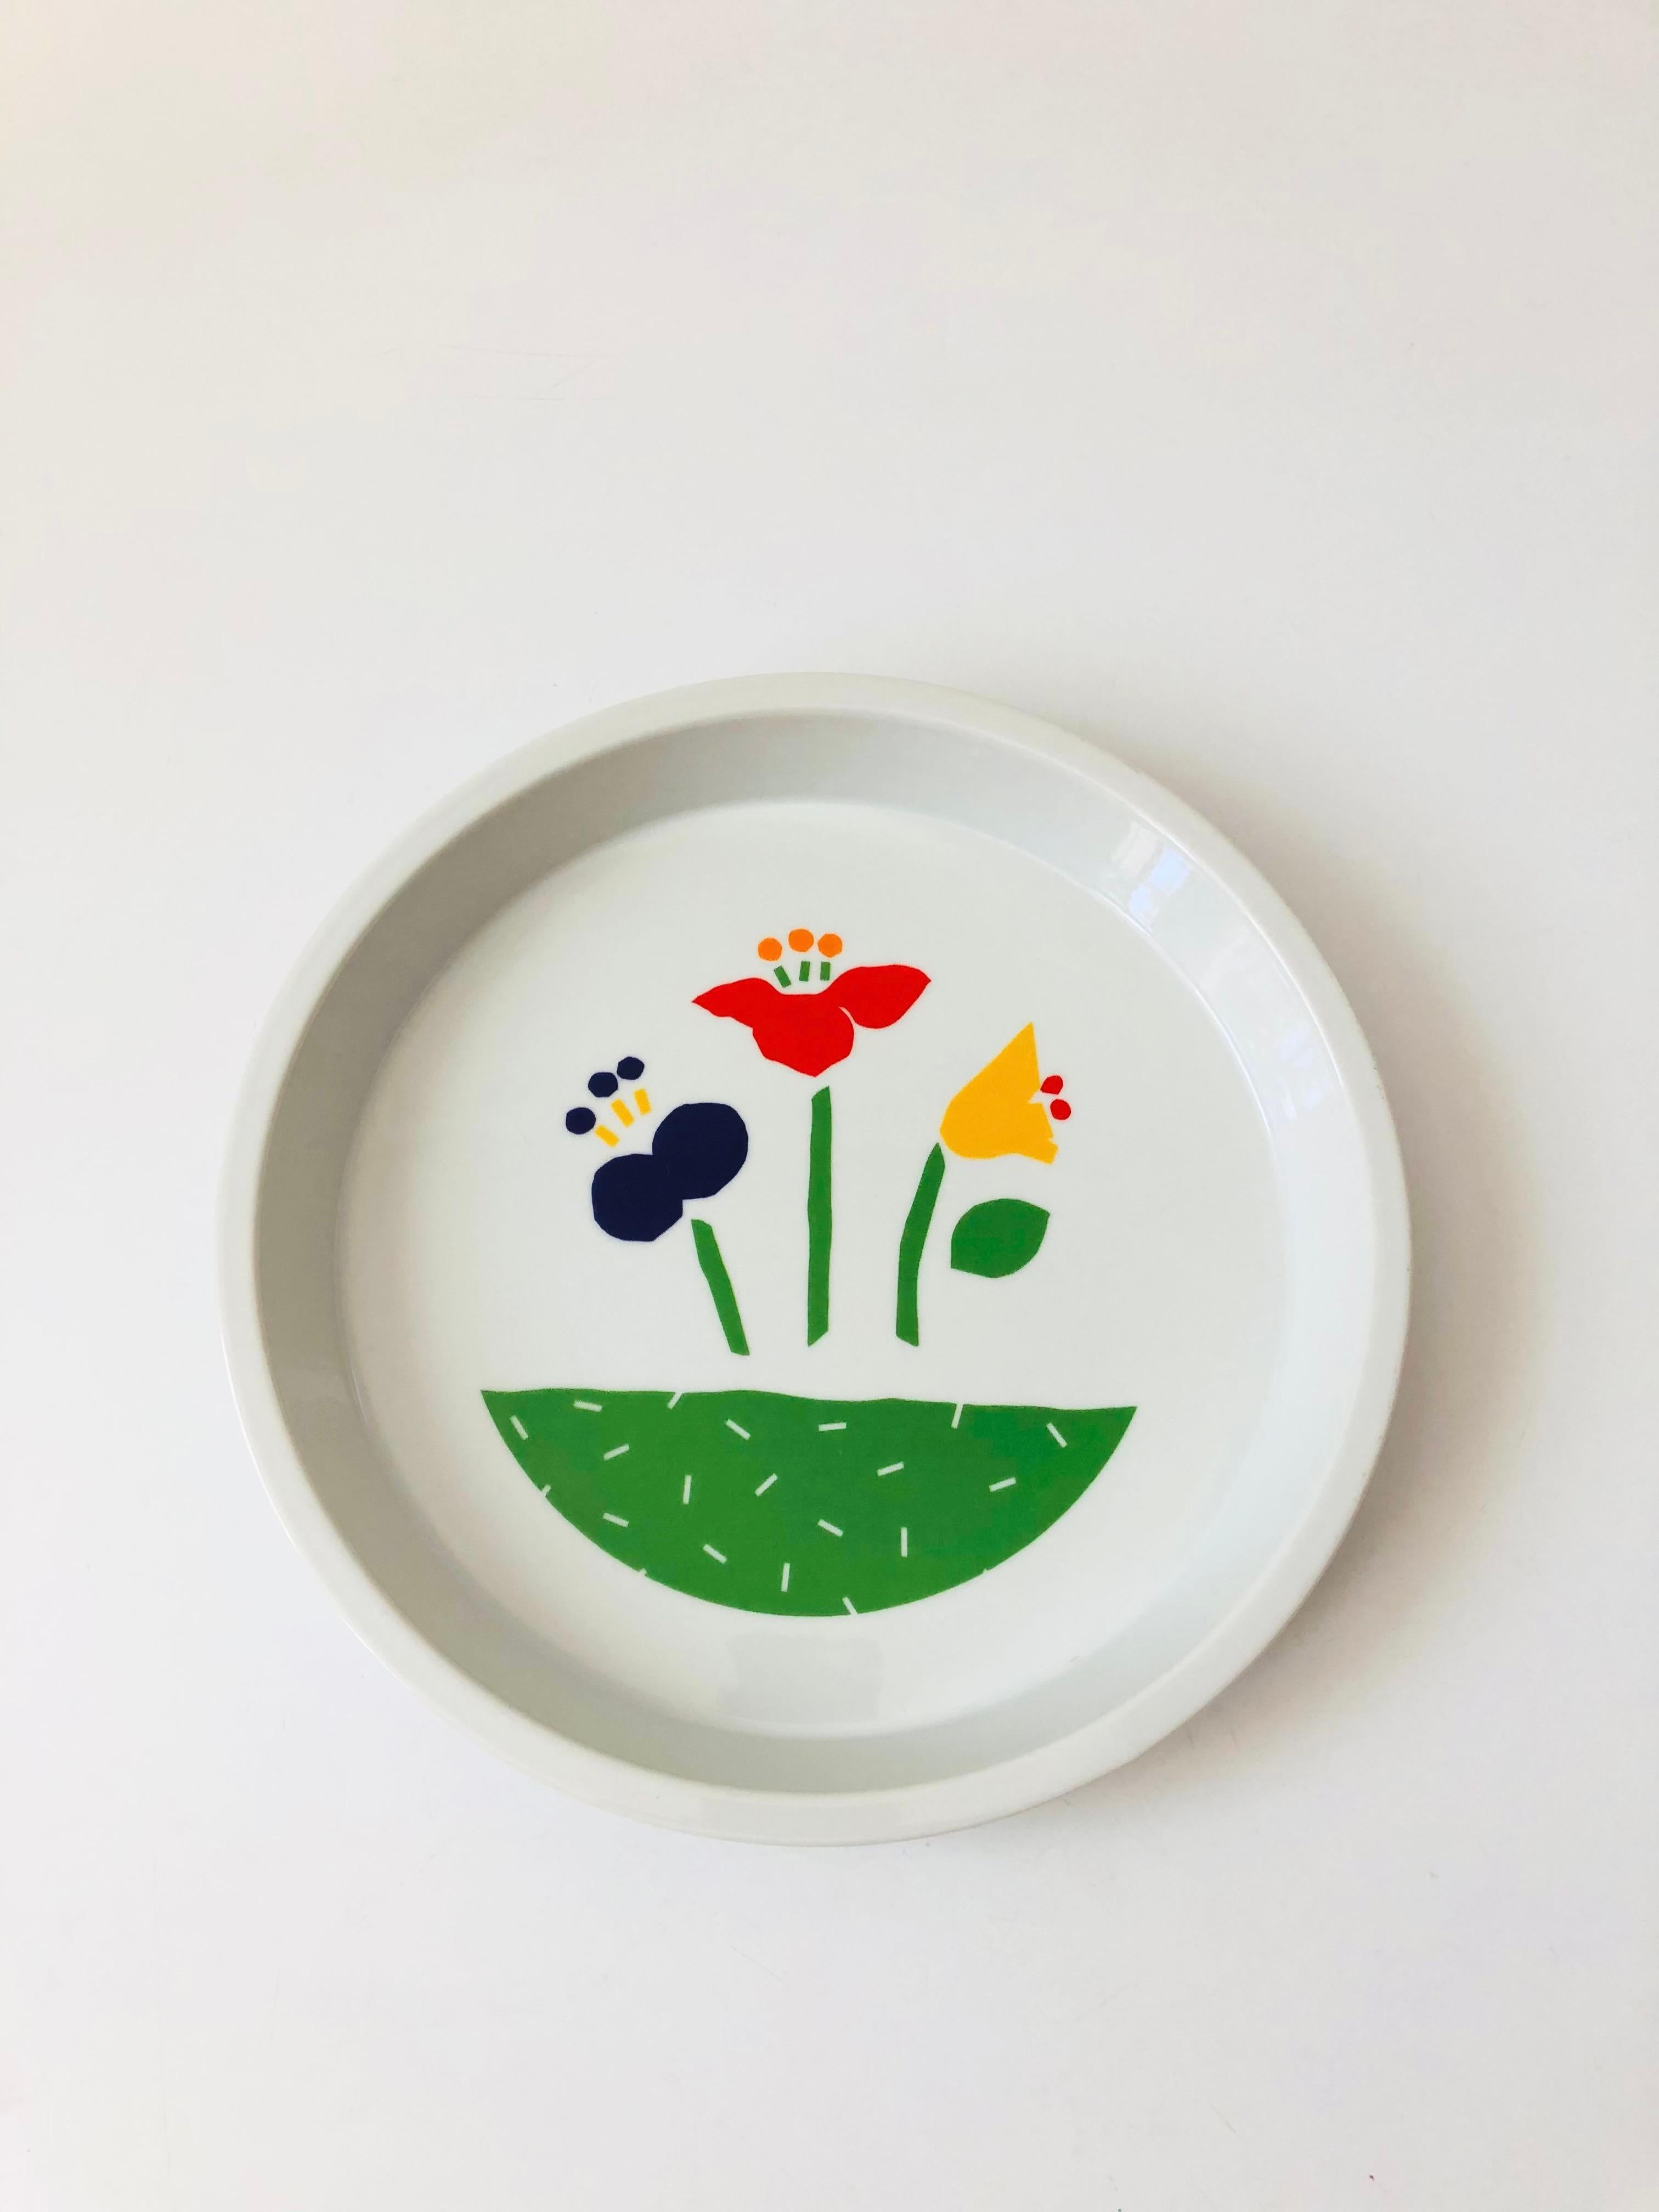 A vintage studio circular ceramic pie dish with a colorful floral design in the center. Made in Japan.

